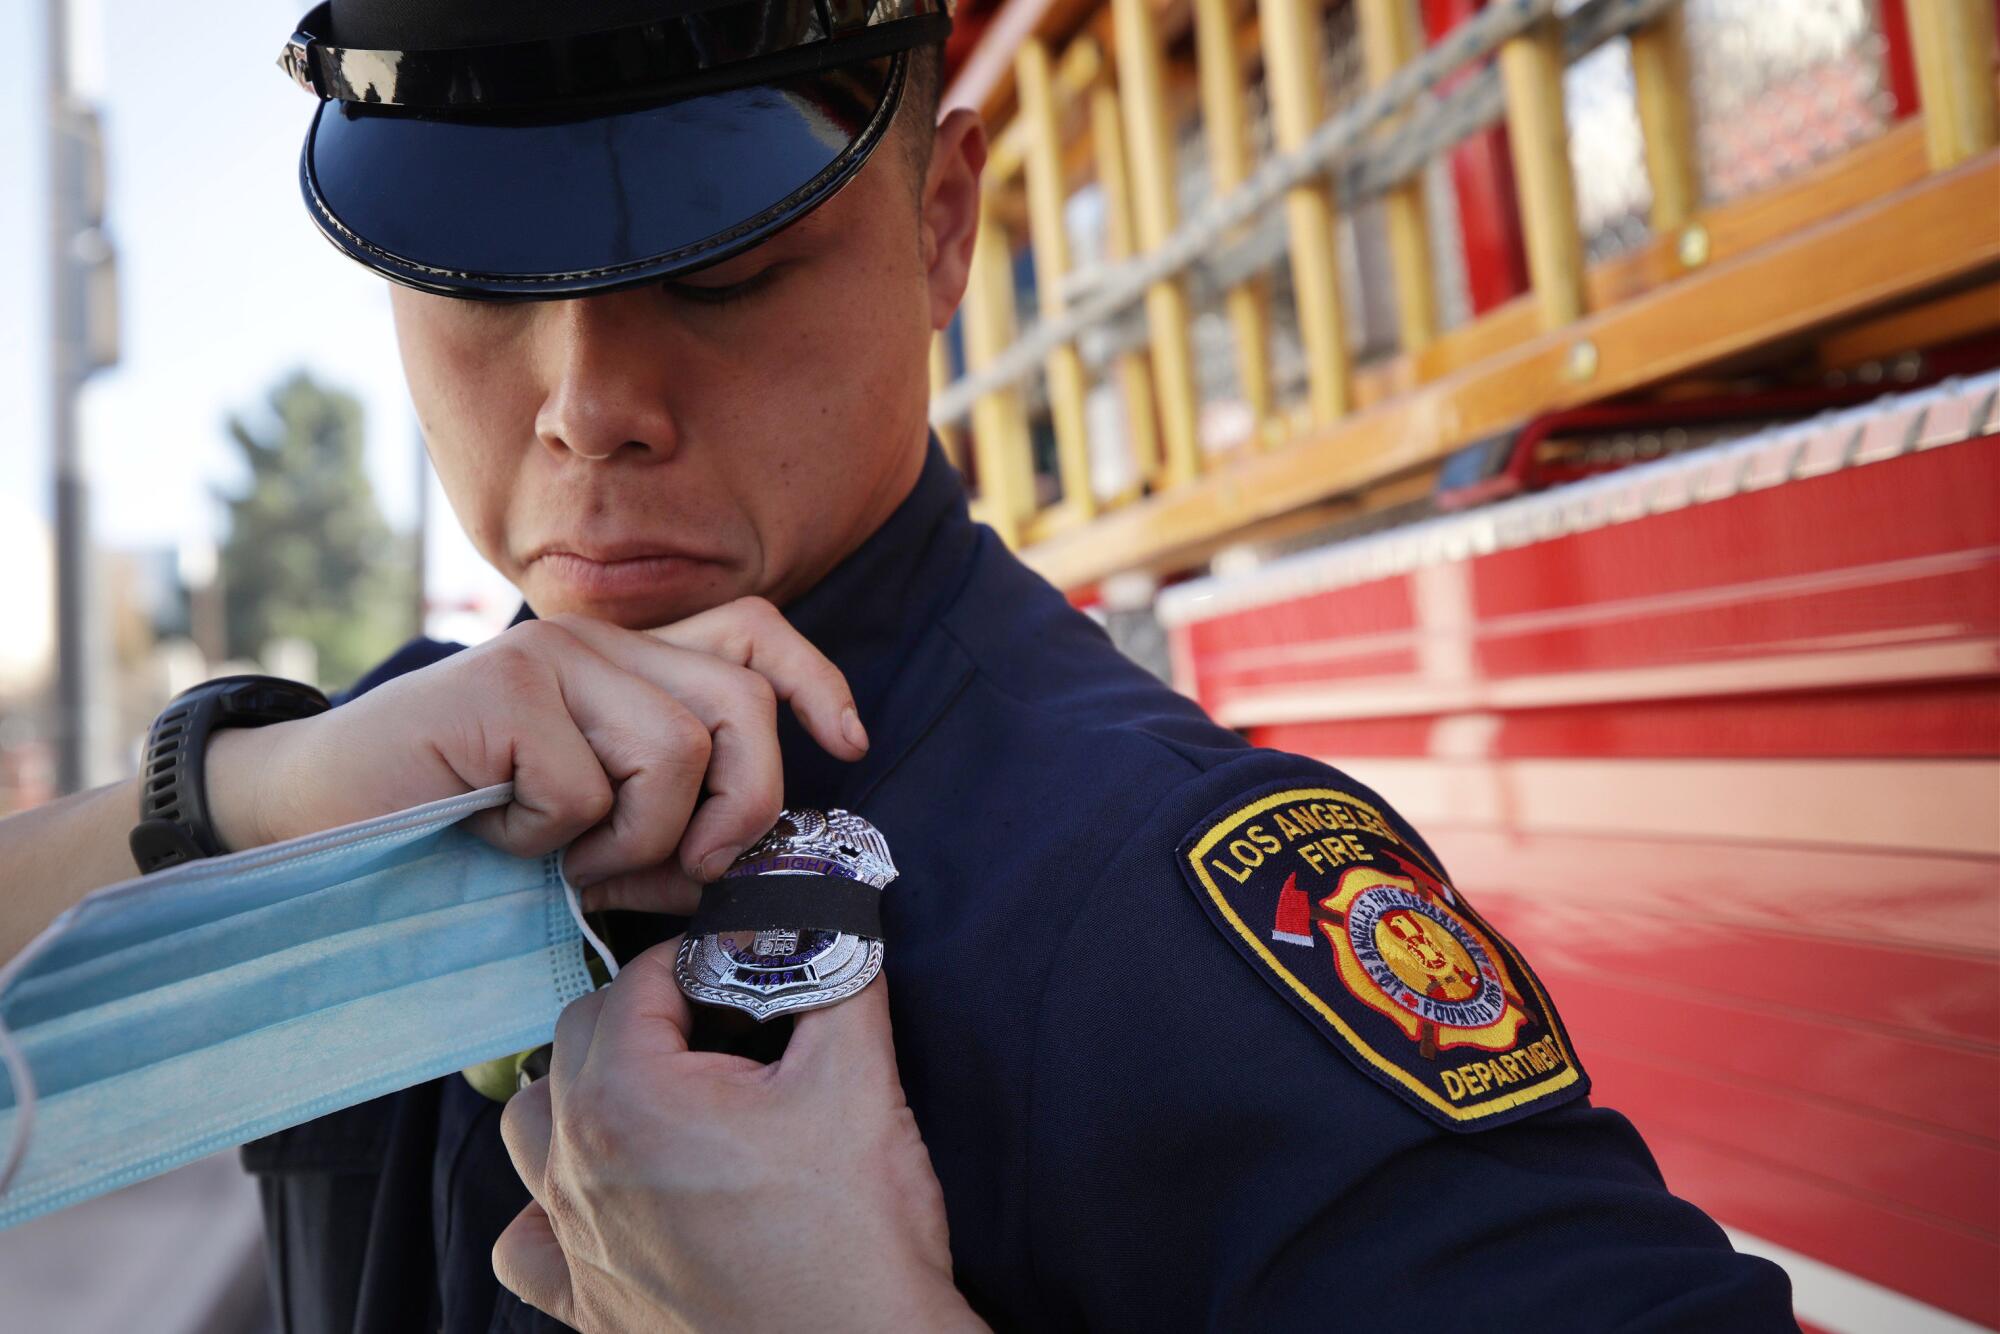 A firefighter attaches a black band to his badge on his uniform